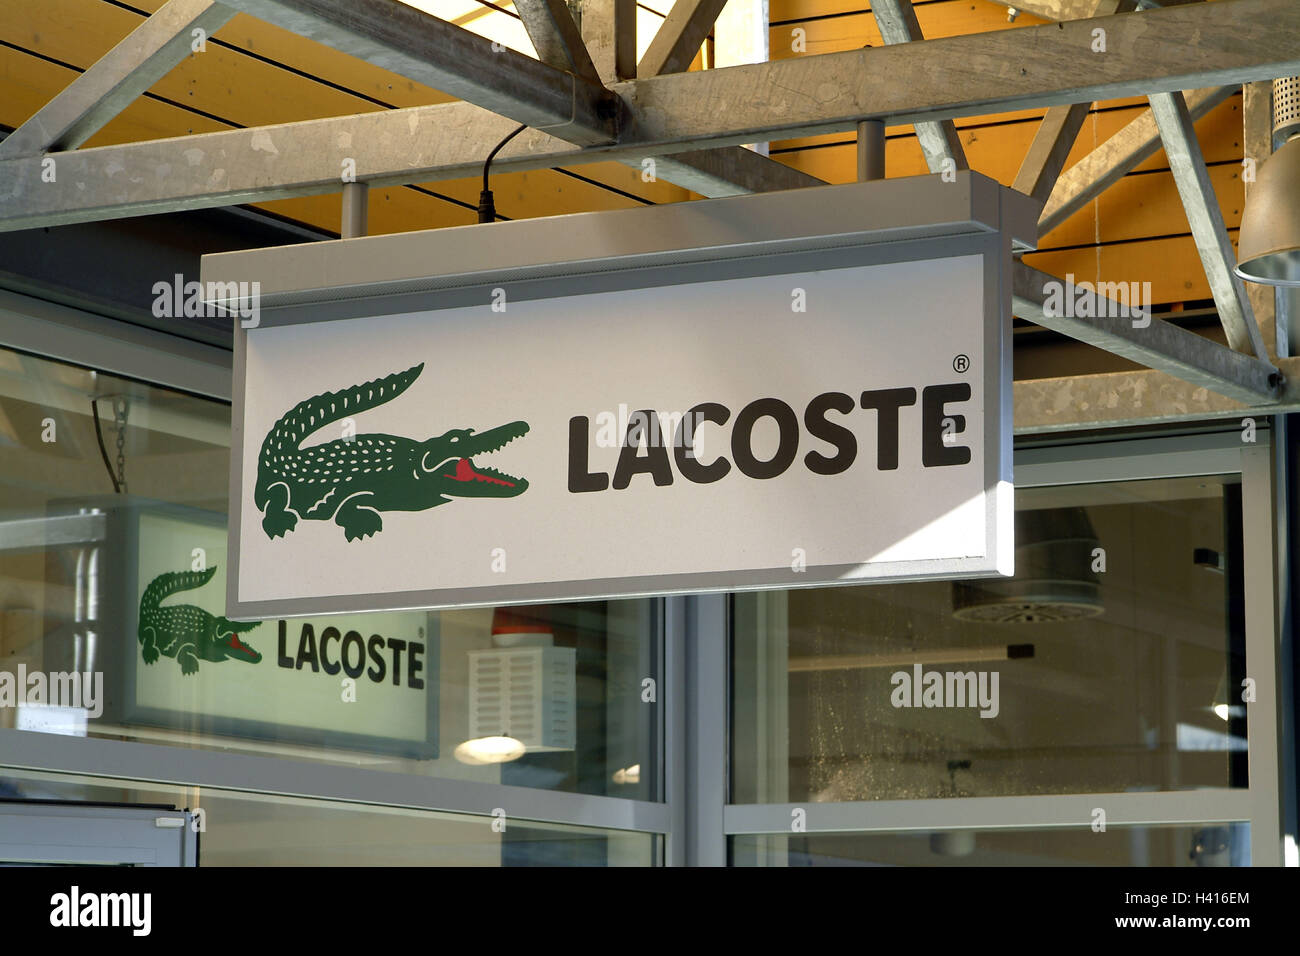 Business, passage, company plaque, Lacoste only editorially economy, retail  trade, loading, boutique, sign, fashion, Fashion, trade name, trade name,  company, company name, sign, logo, company logo, designer fashion, designer- fashion mark, fashion ...